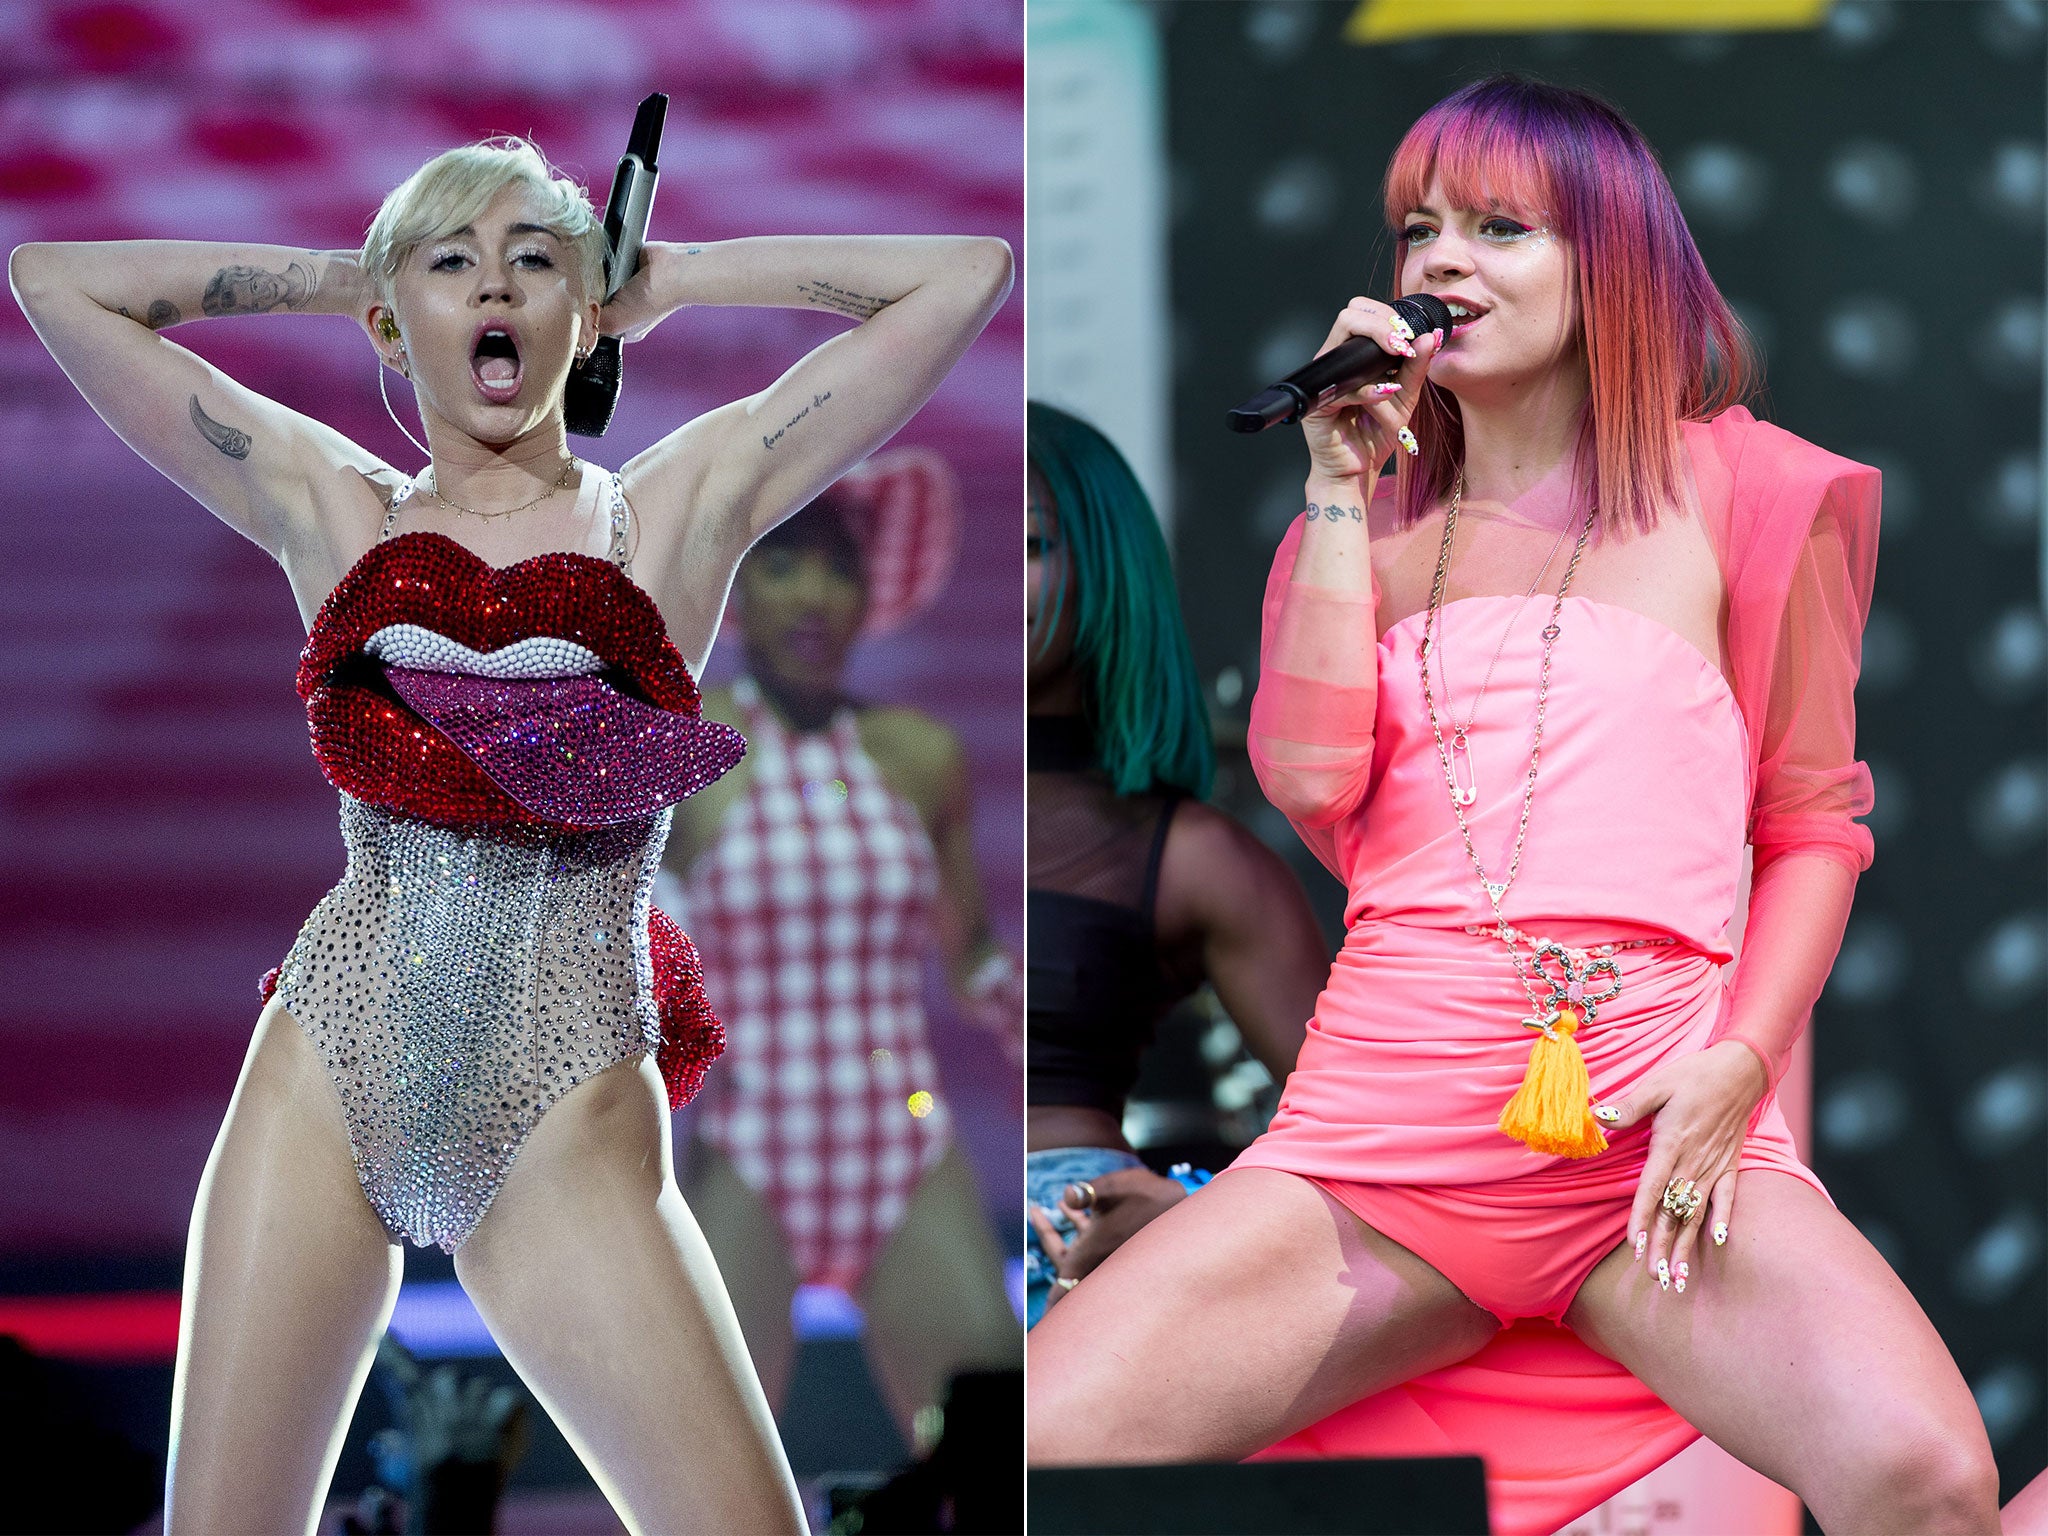 Miley Cyrus has invited Lily Allen to join her on her US Bangerz tour